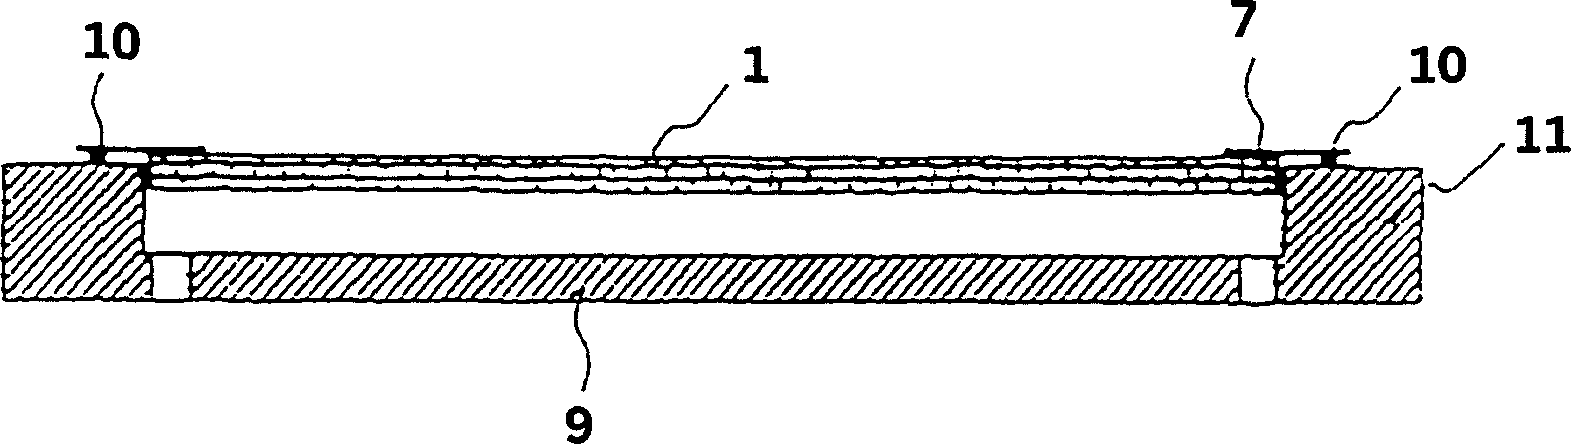 Gas diffusion electrode assembly and its production